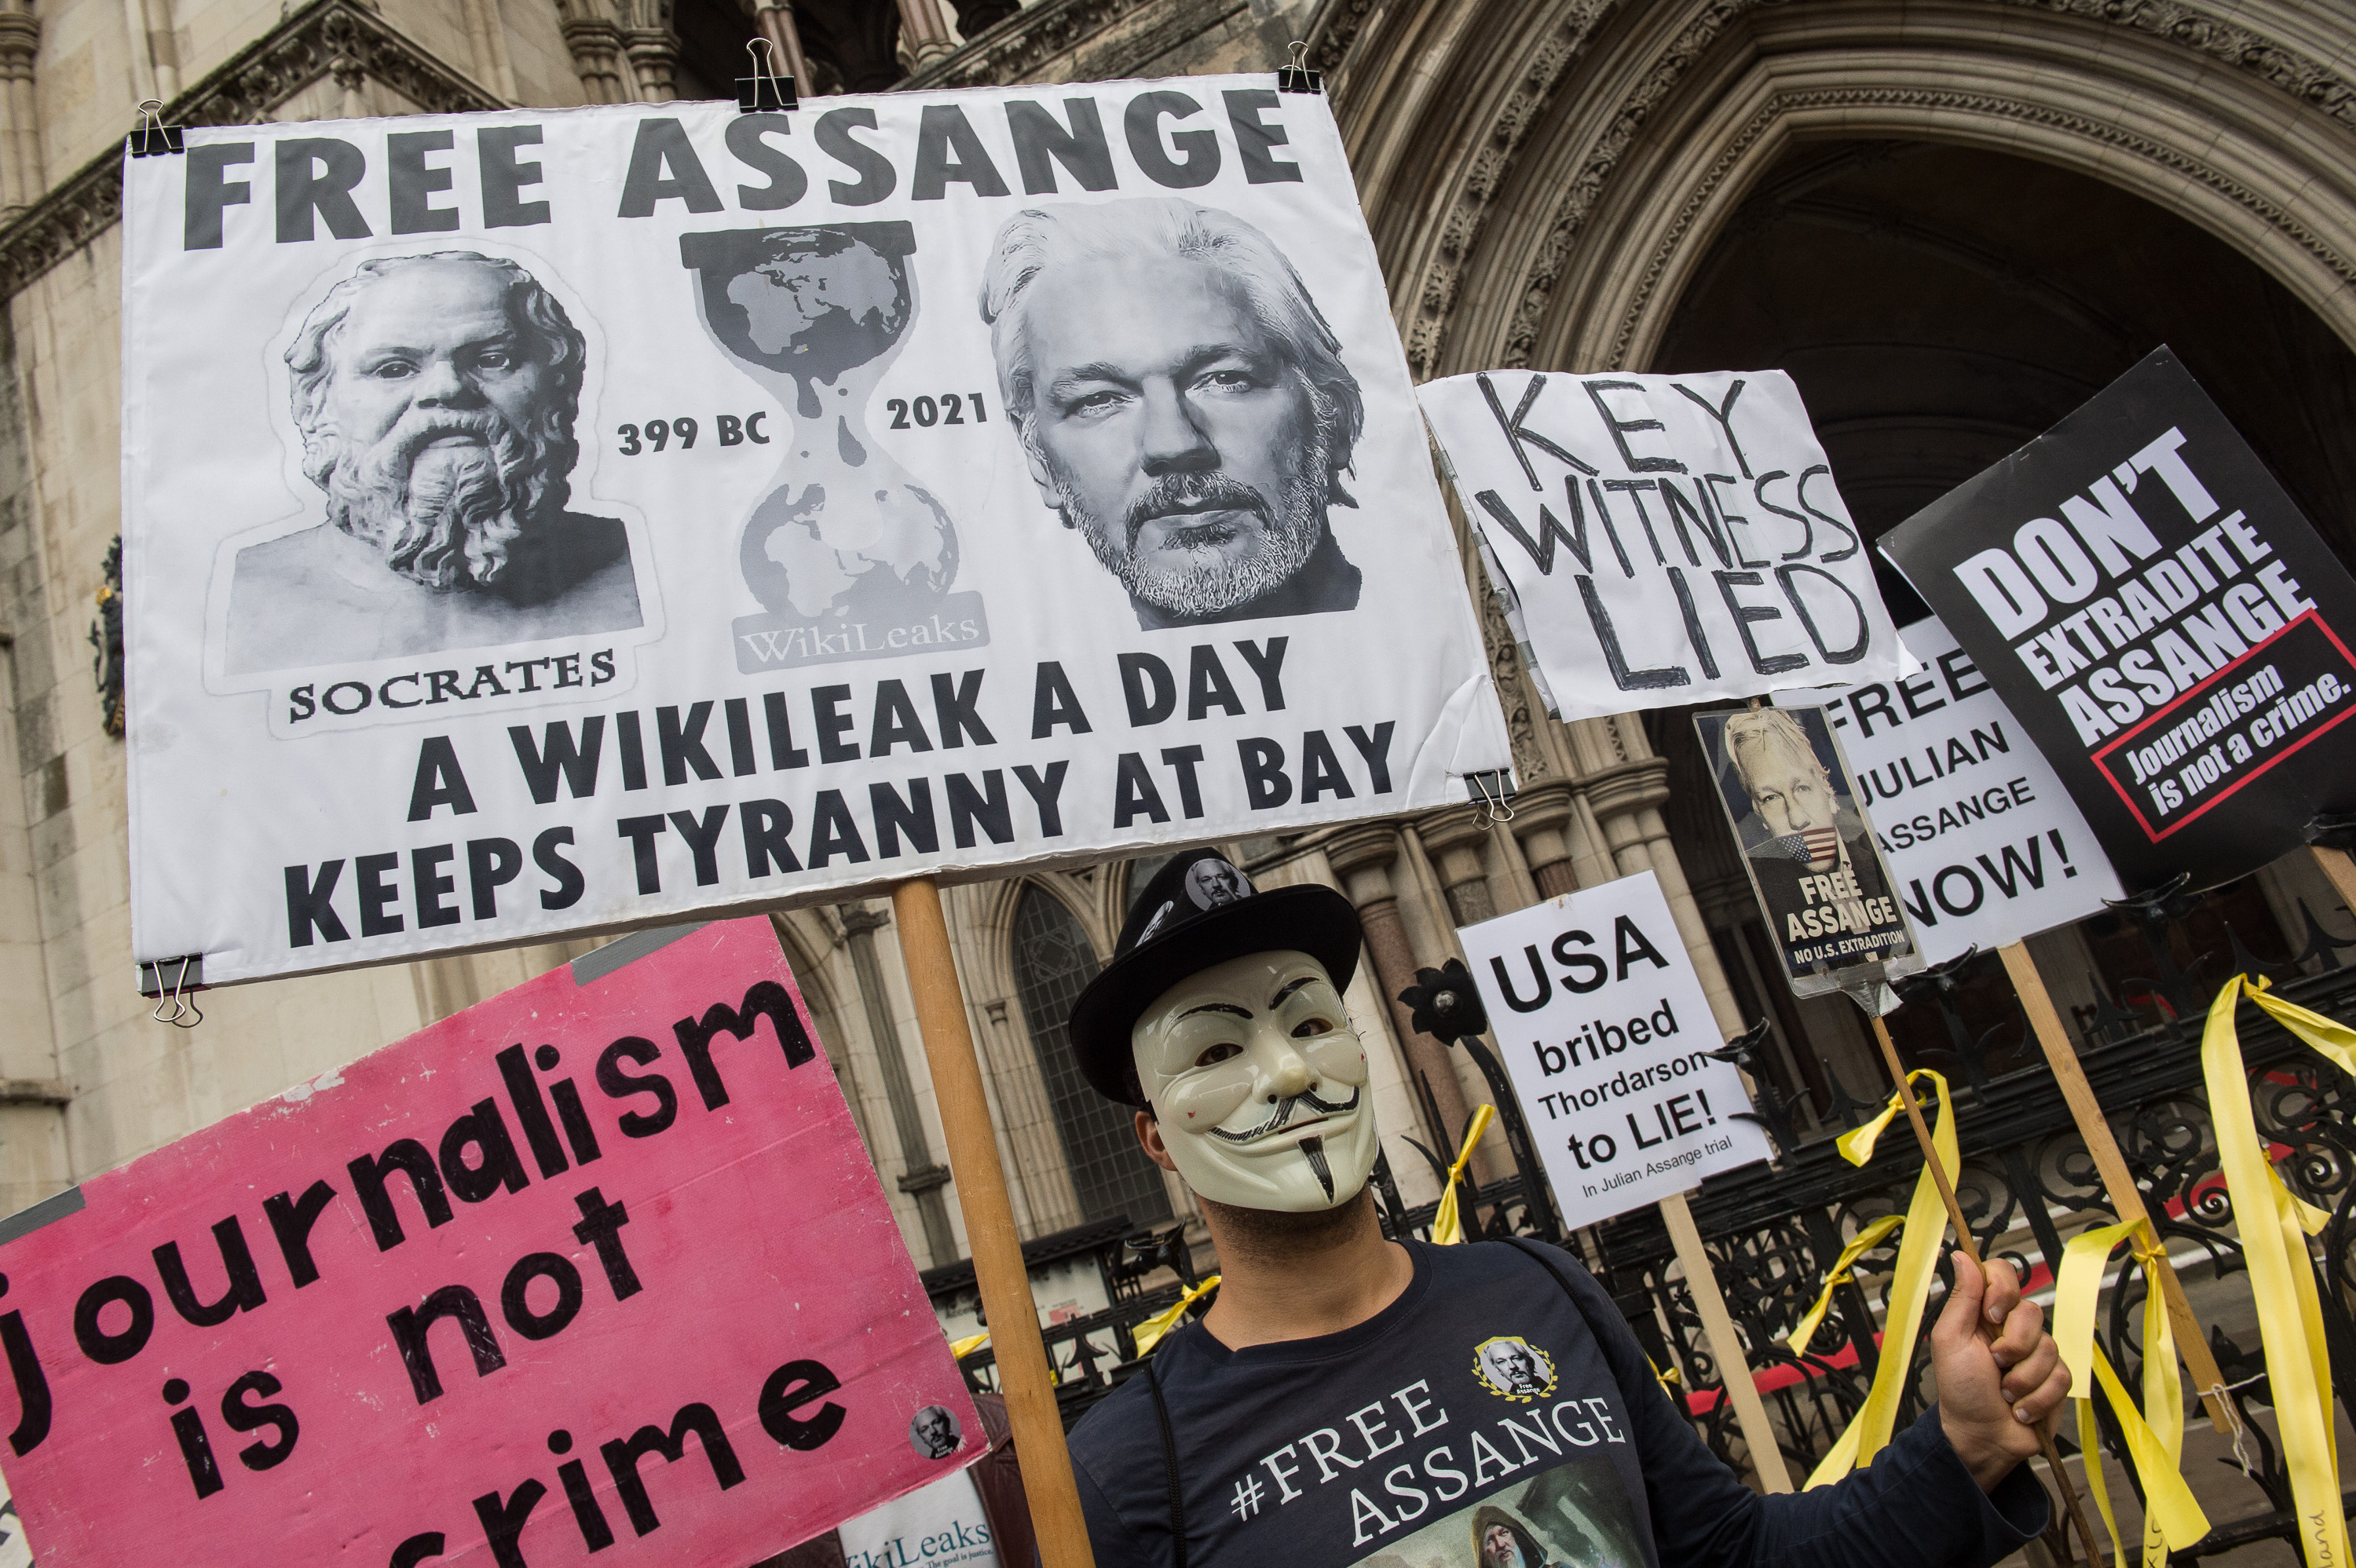 Assange Extradition Appeal Hearing Photos: October 27, 2021